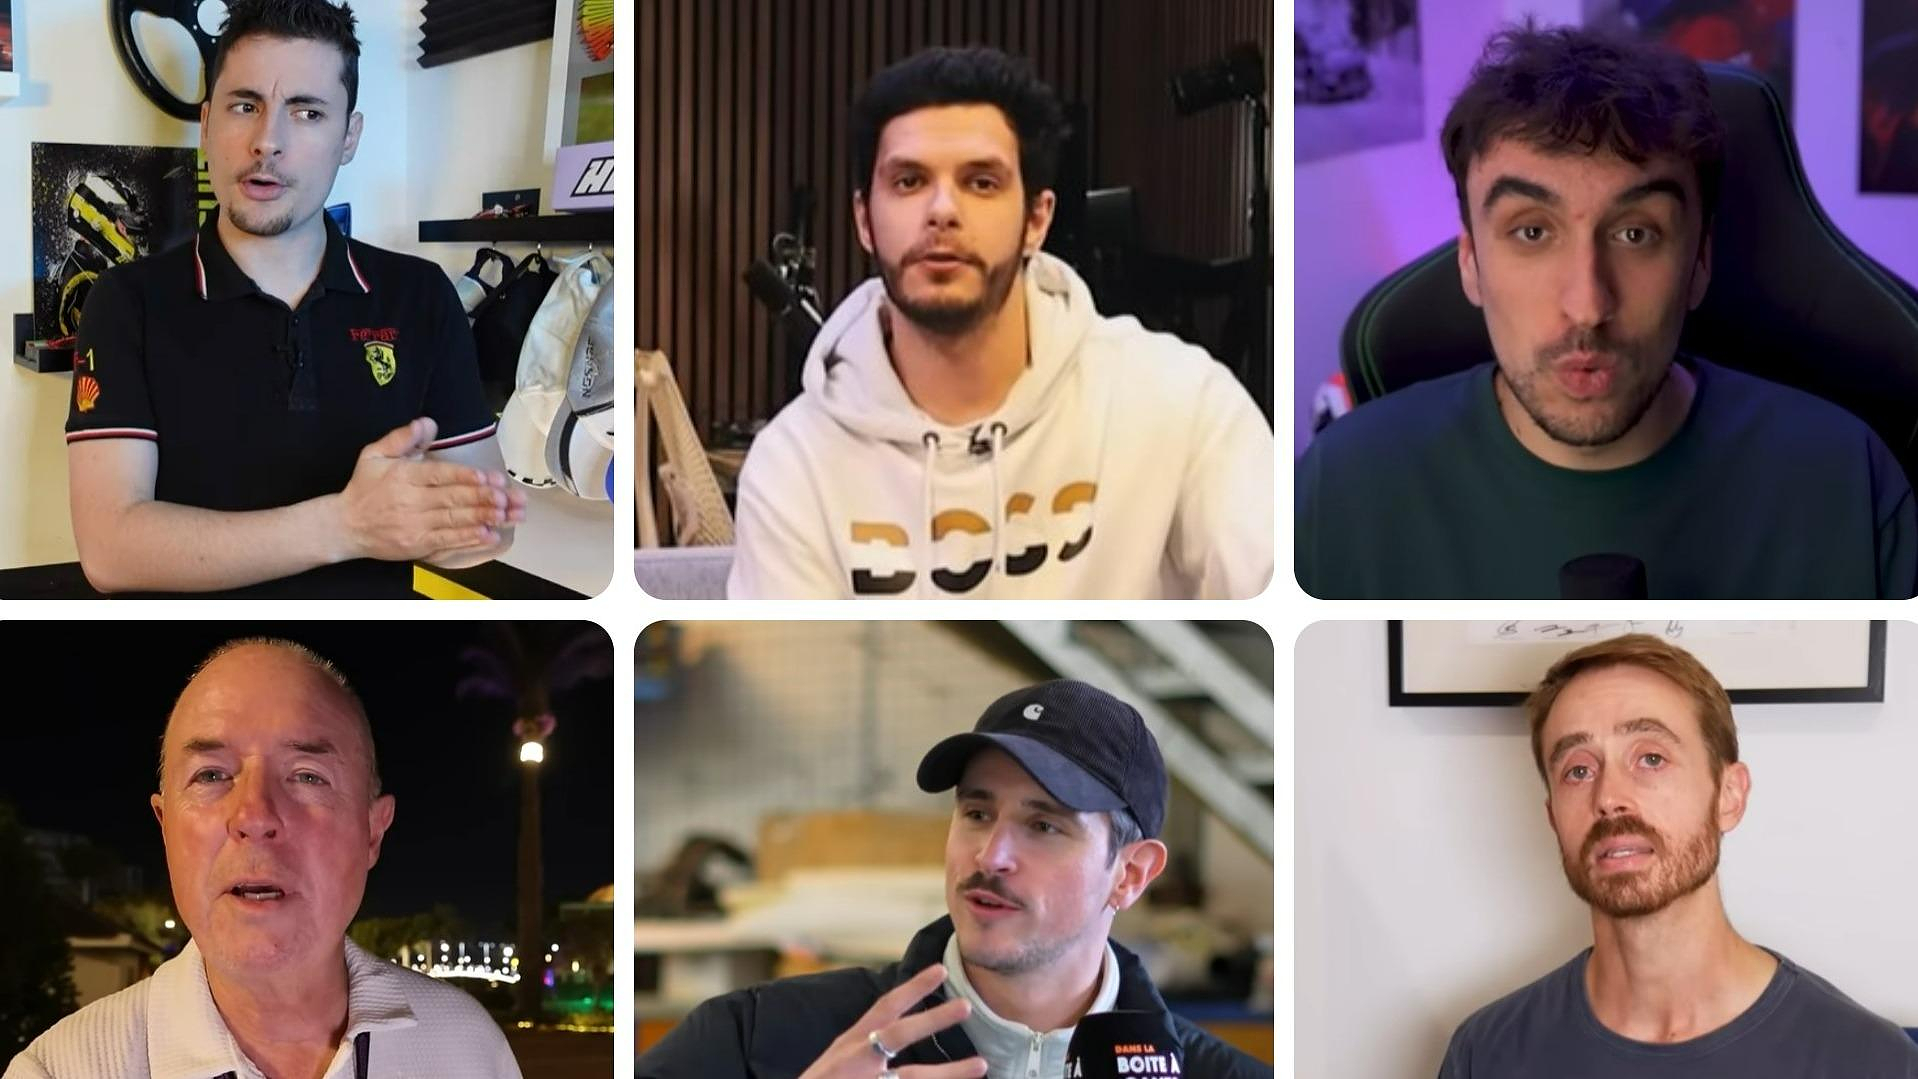 Formula 1: on YouTube, TikTok or Twitch, who are the 12 “influencers” to follow?